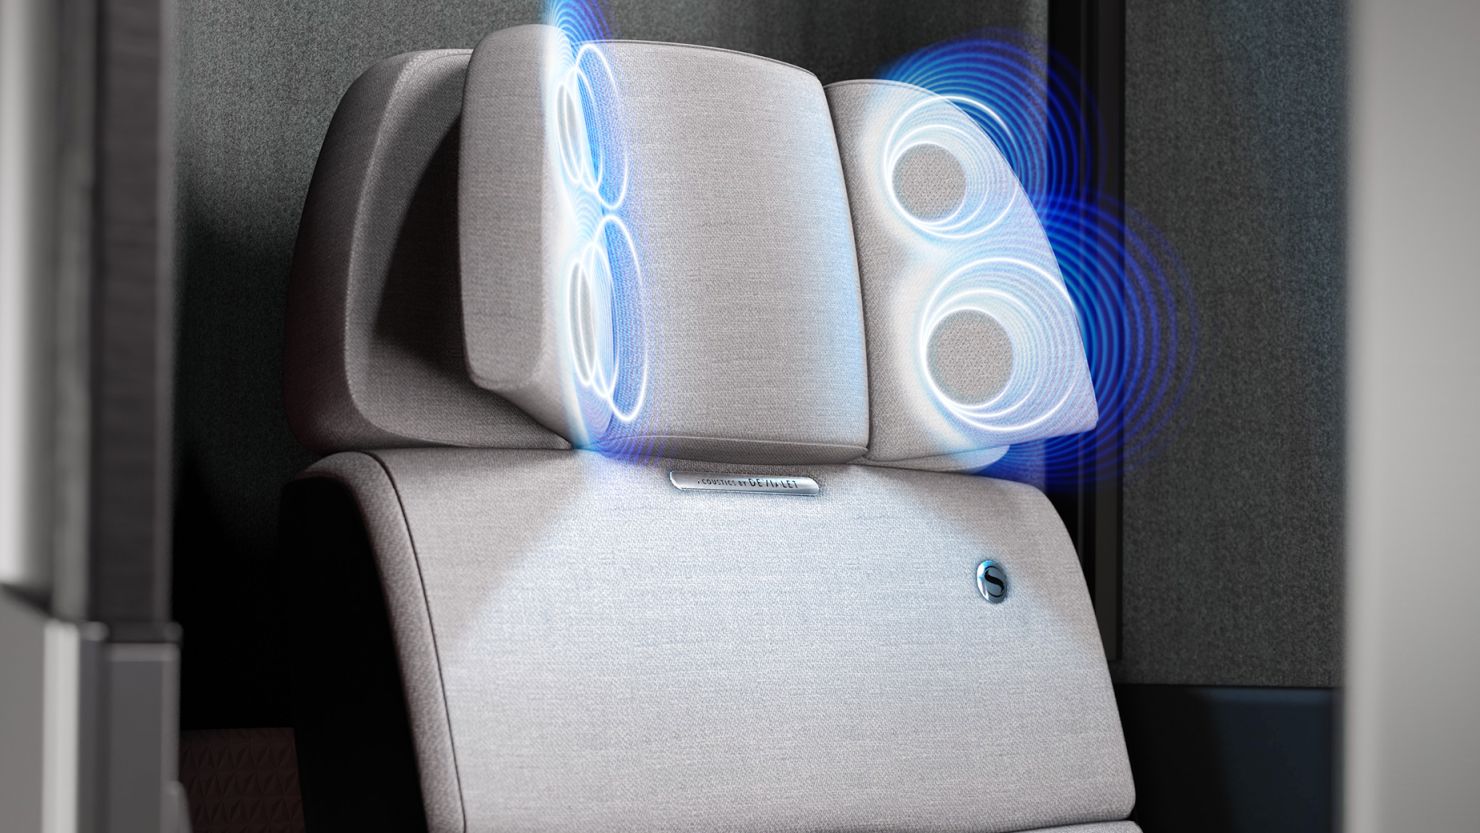 Safran Seats has created a headset-free sound system for aircraft seats.